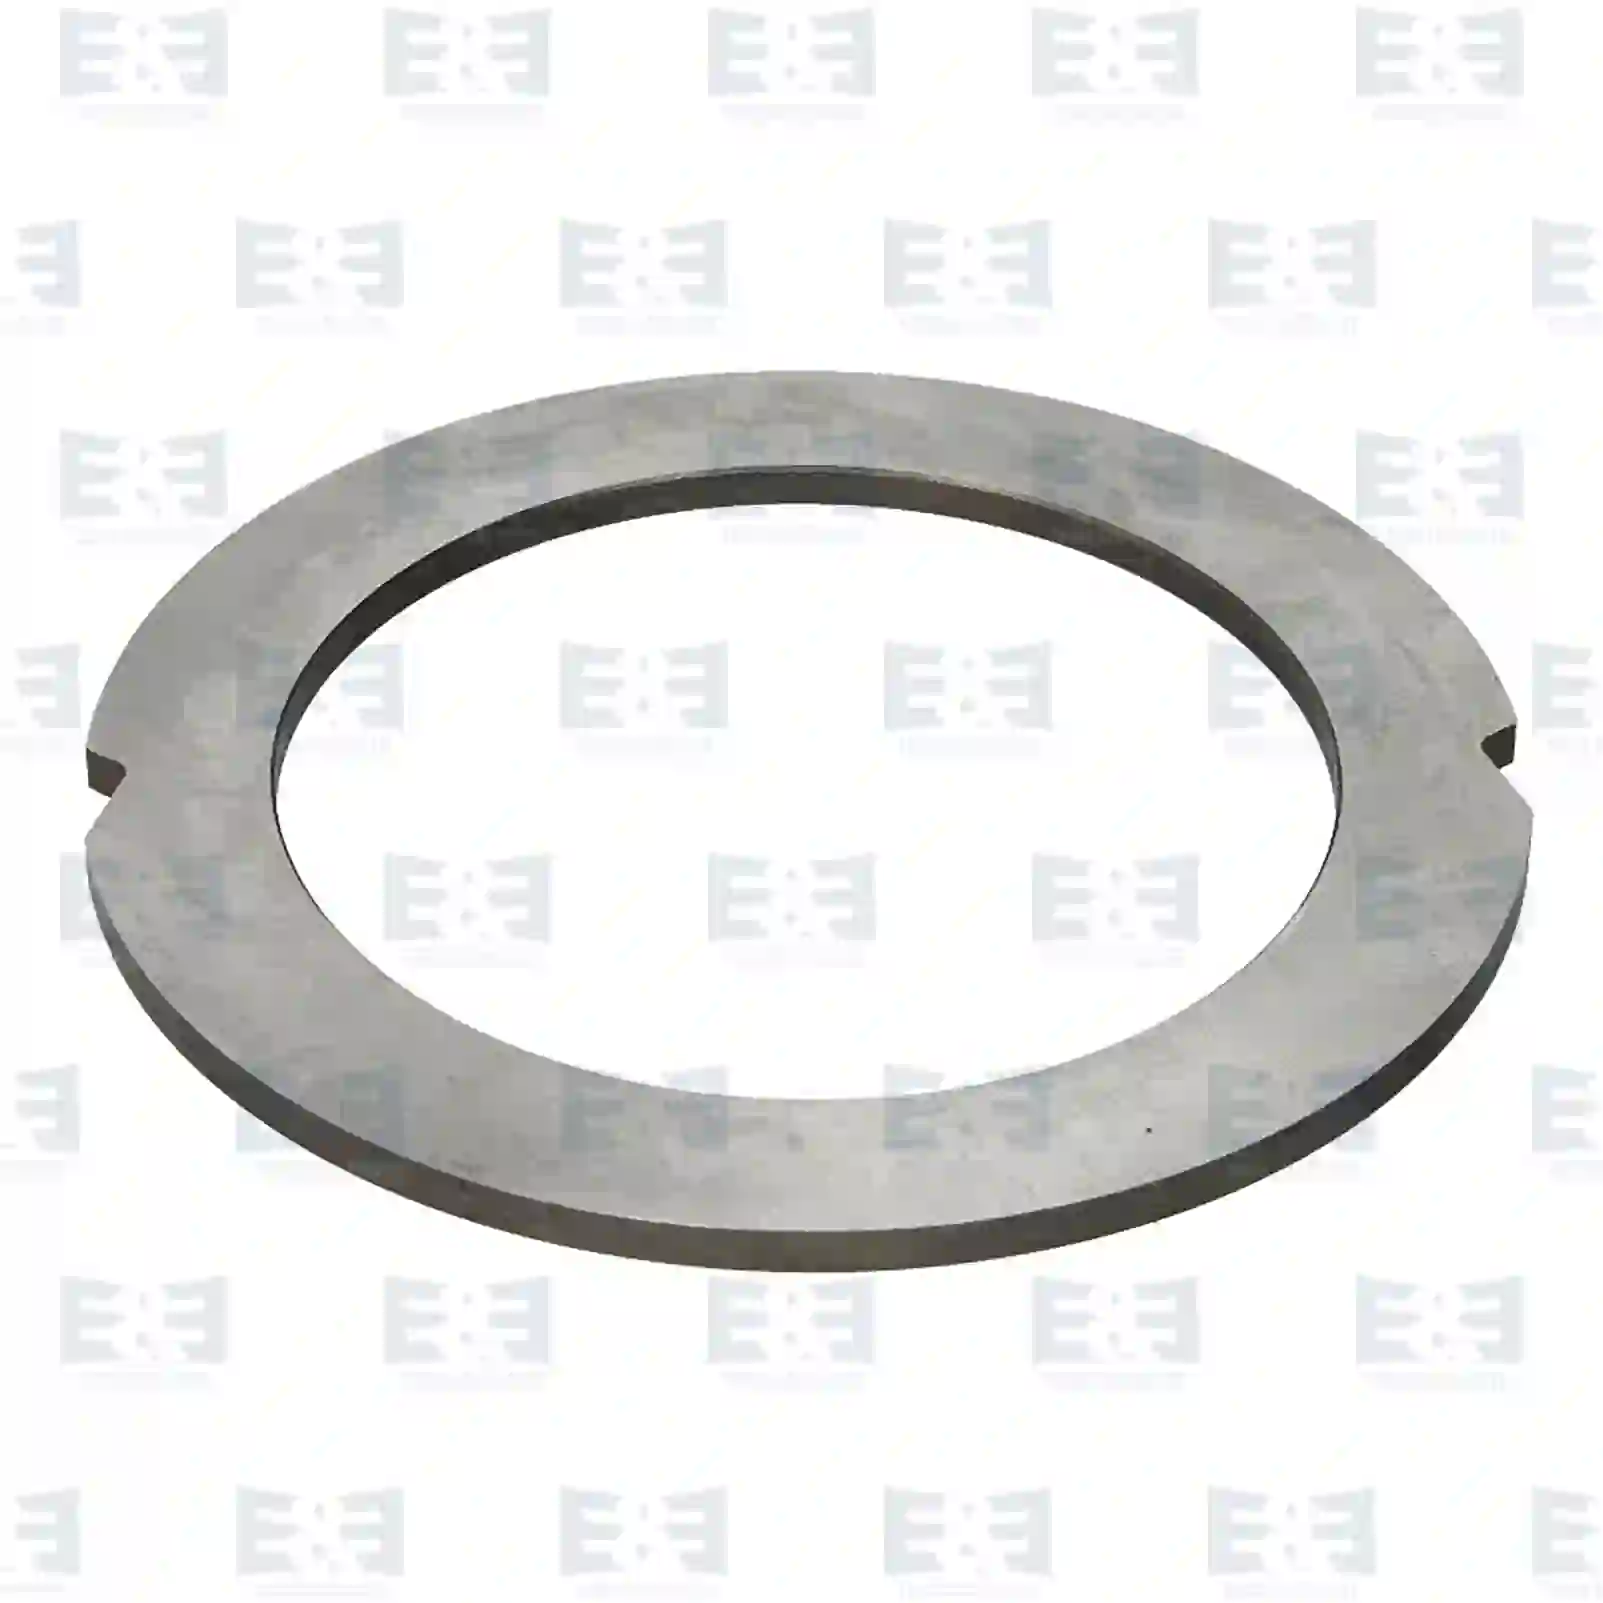 Bearing Bracket, Bogie Suspension Thrust washer, EE No 2E2281908 ,  oem no:1590064, ZG30638-0008, E&E Truck Spare Parts | Truck Spare Parts, Auotomotive Spare Parts